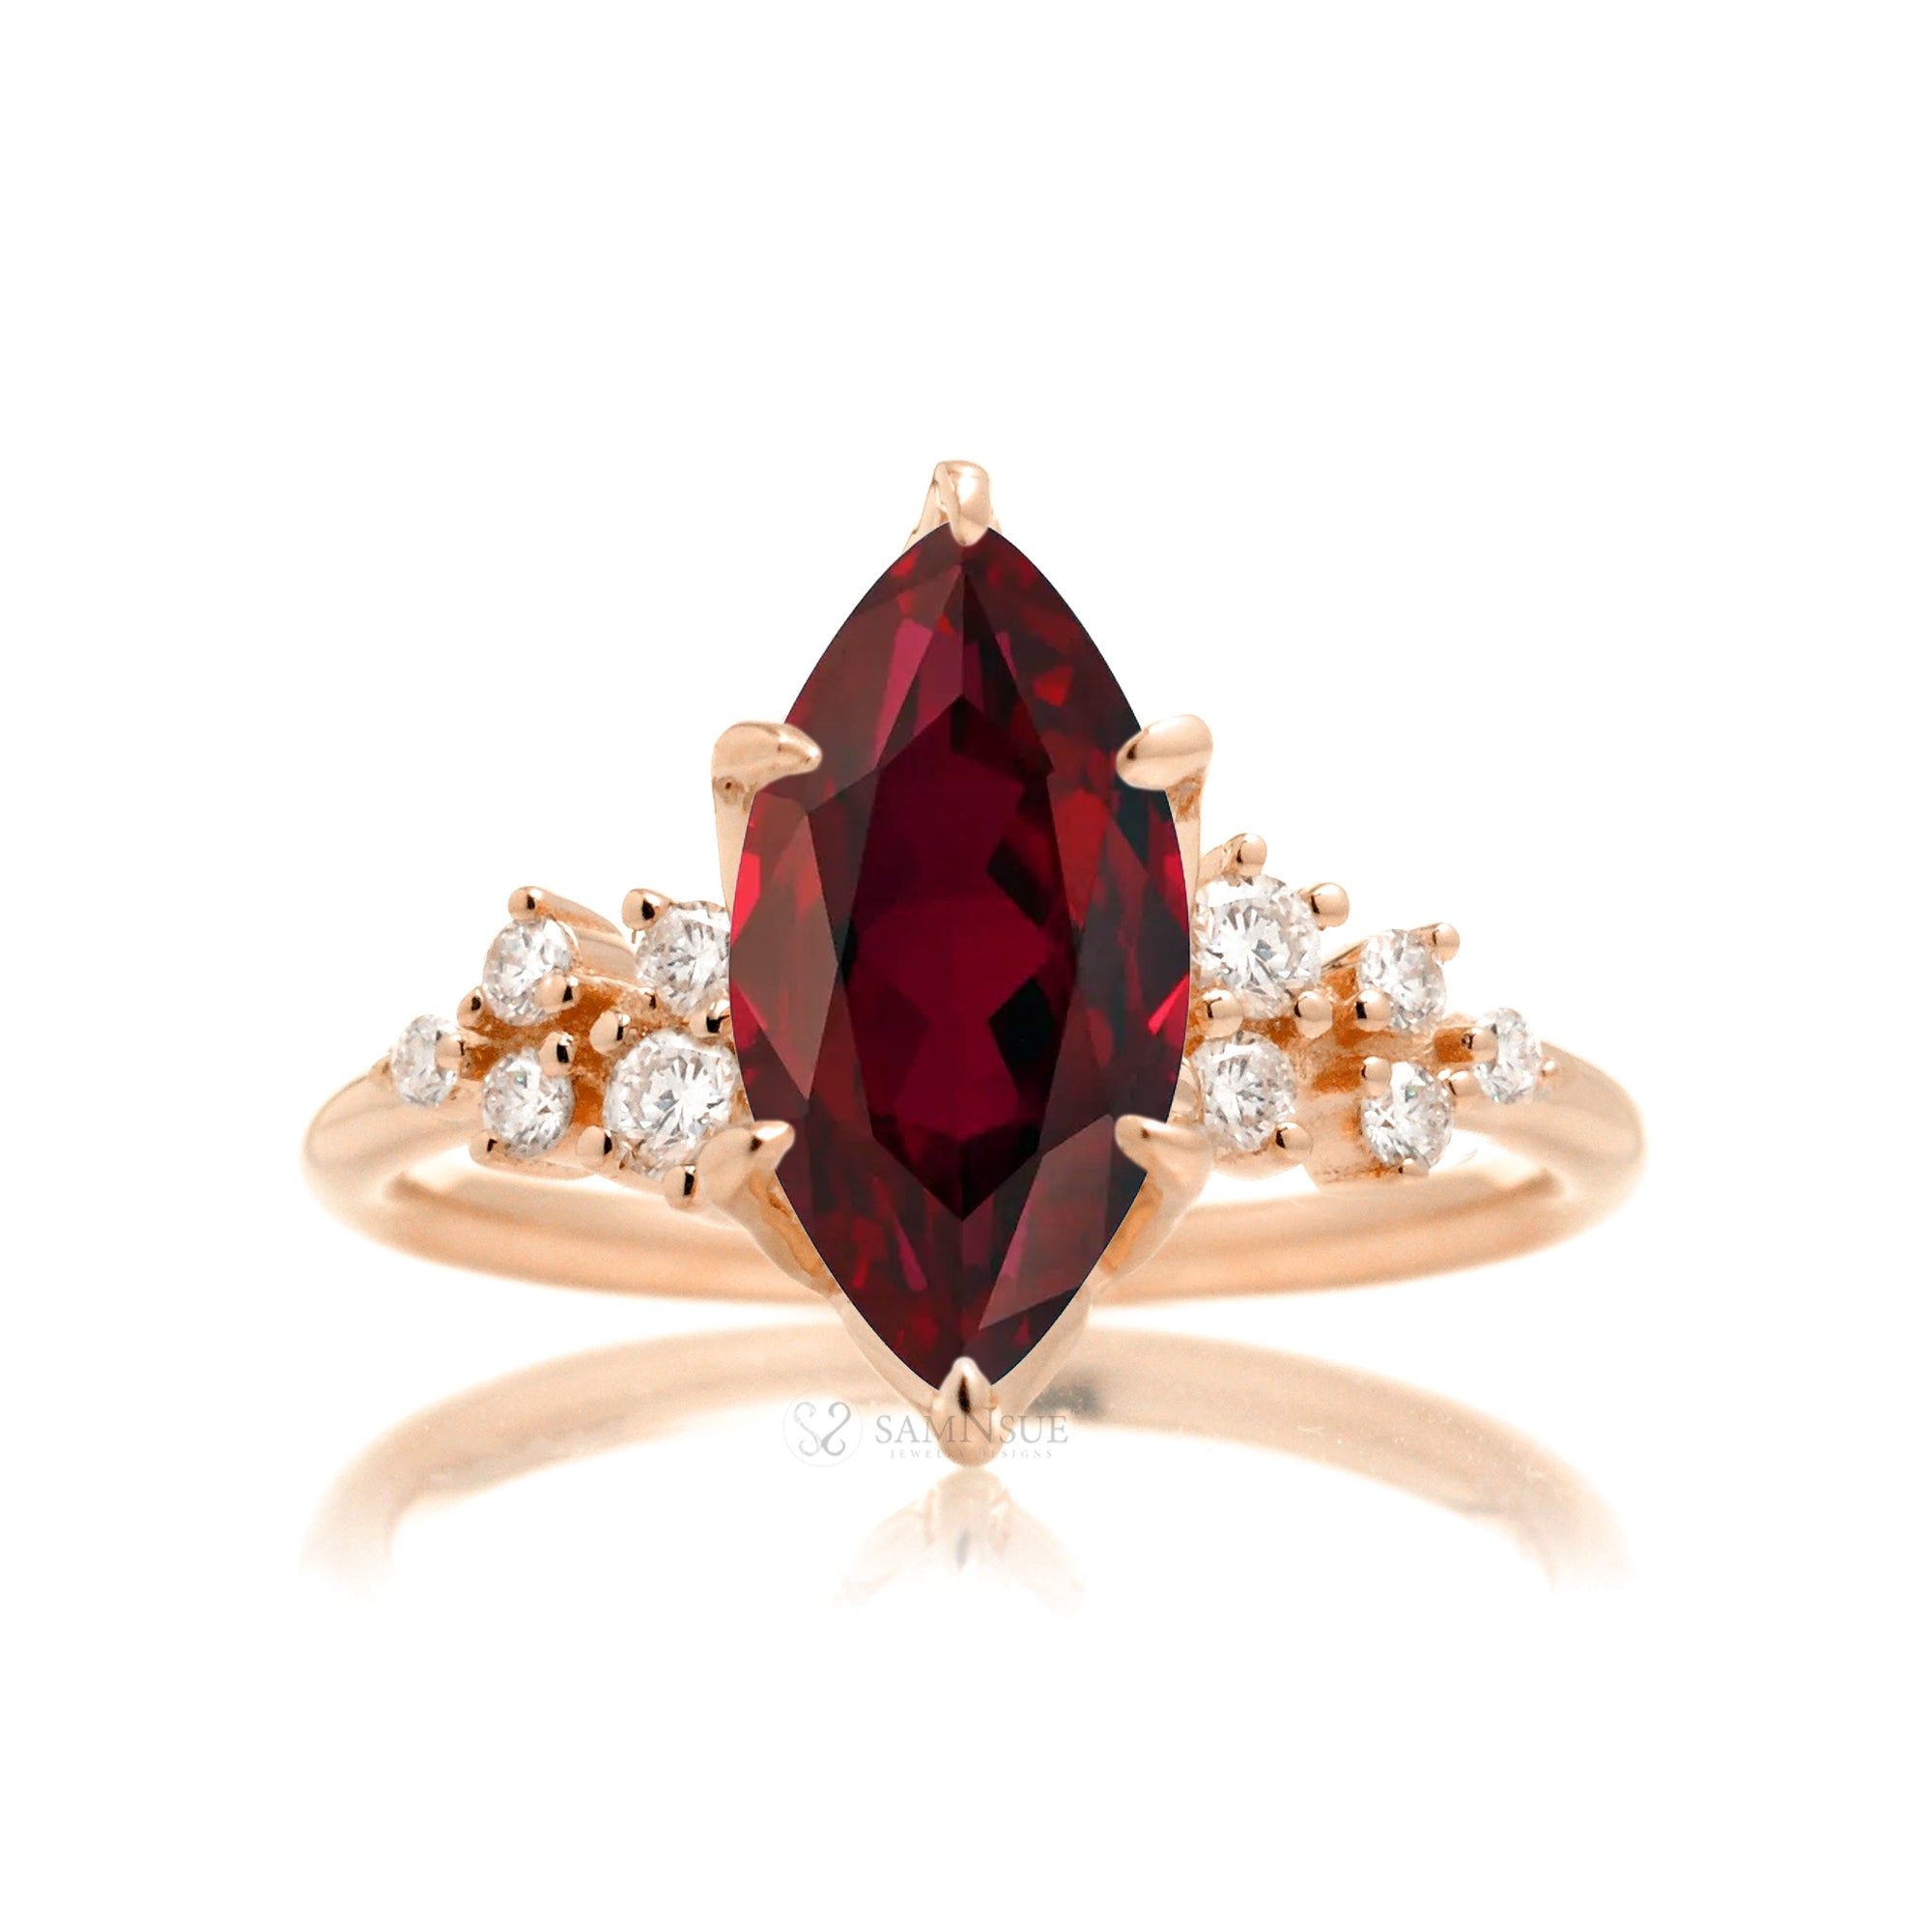 Marquise ruby and diamond solitaire engagement ring in rose gold